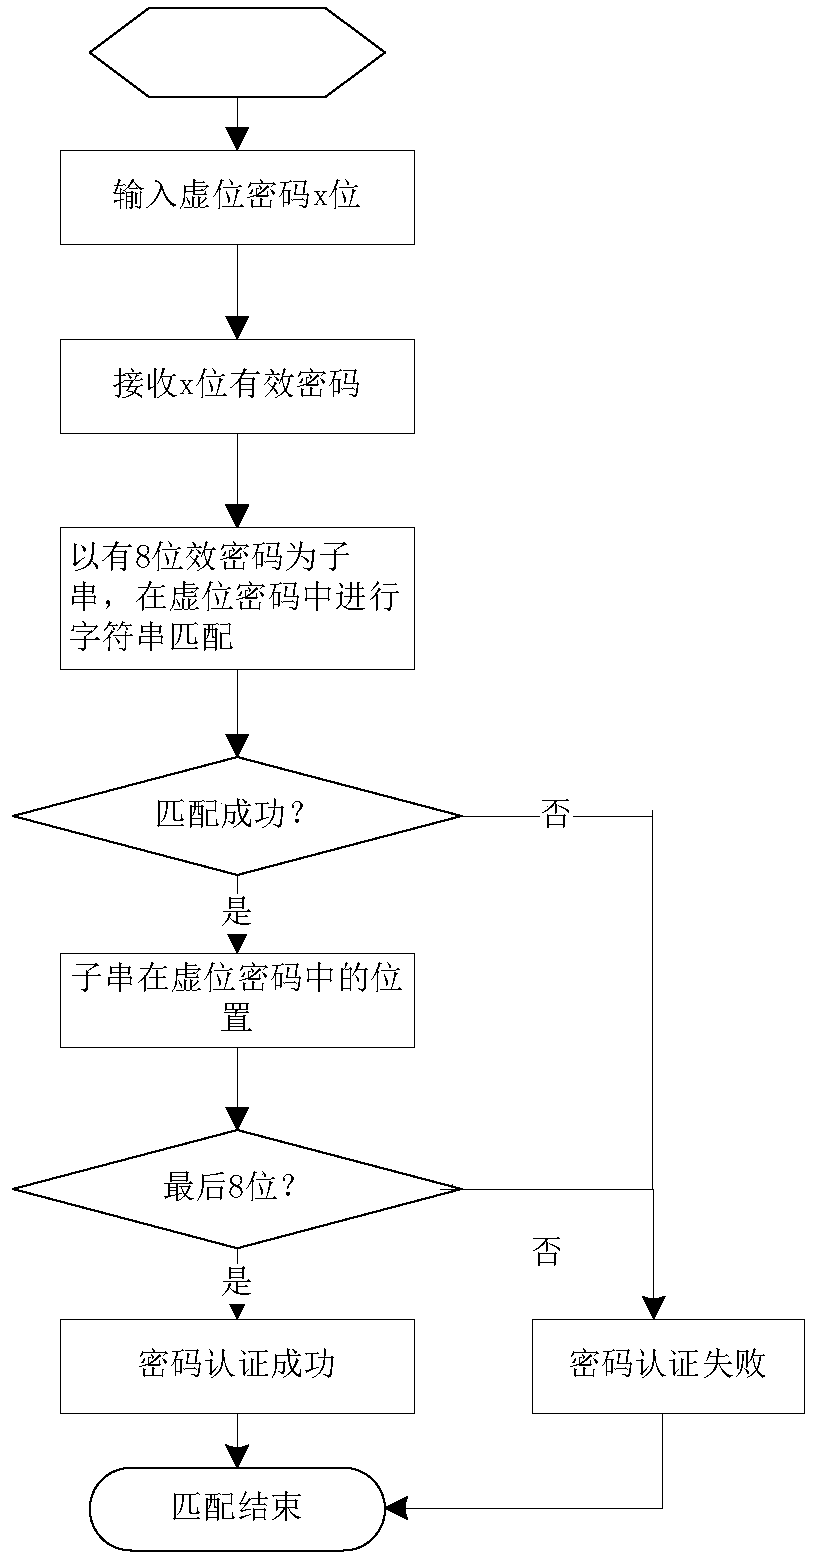 Virtual password security processing method and system